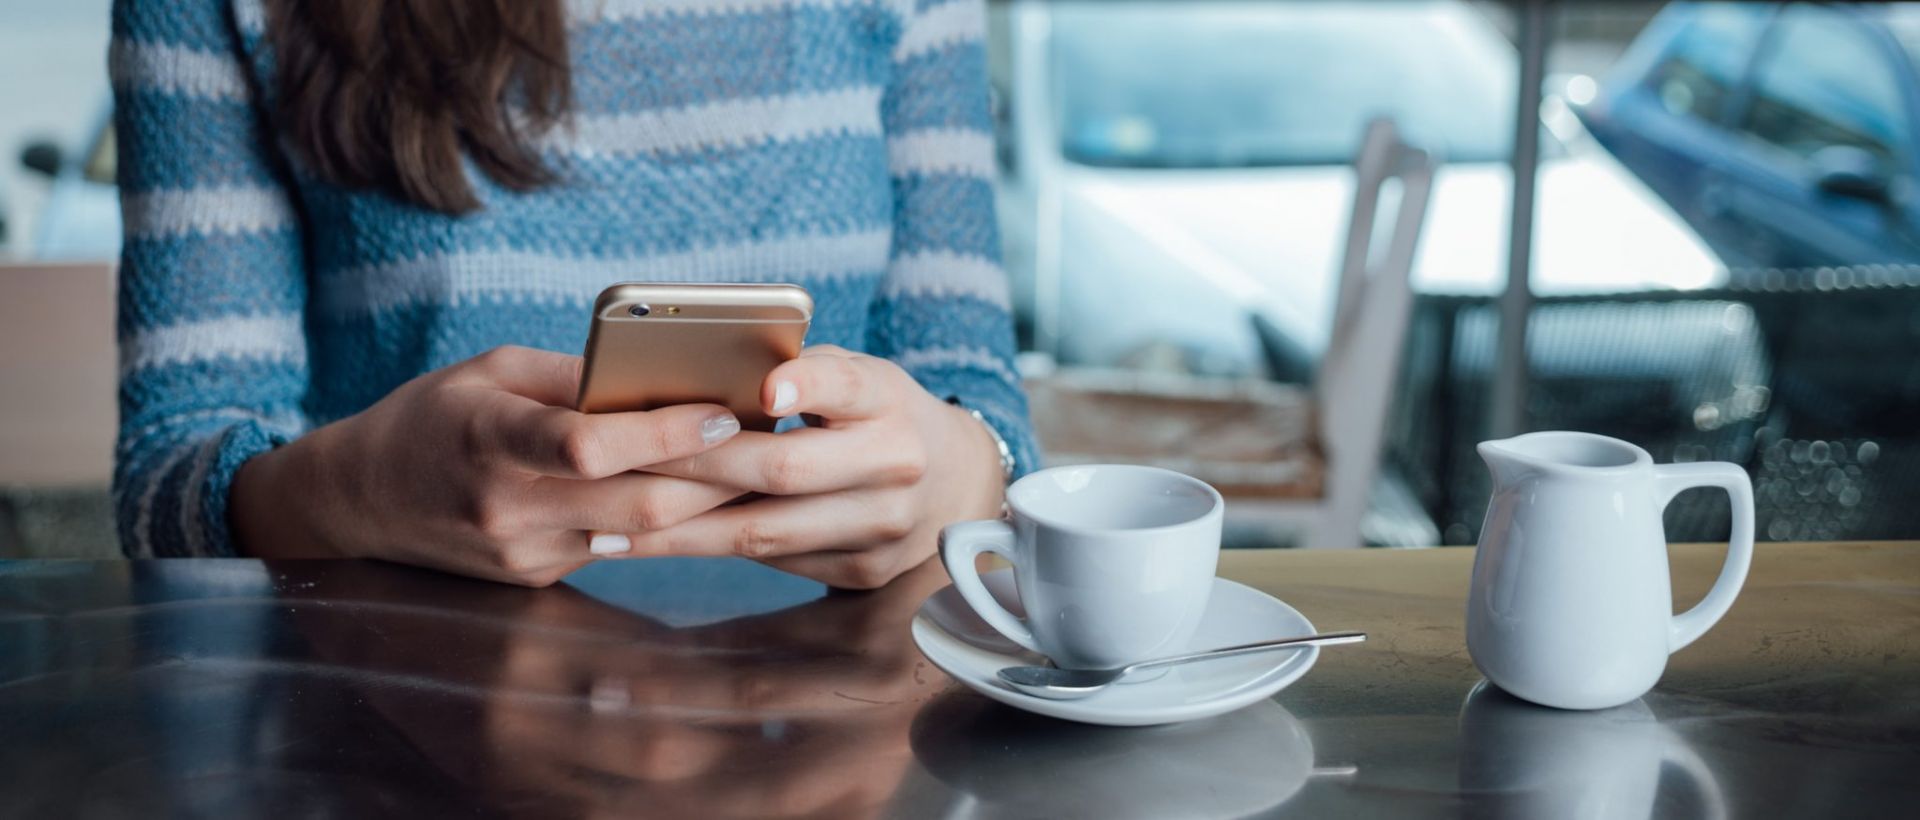 Close-up of woman hands and torso as she sits at table in a public restaurant. The table is set with coffee cup and small creamer pitch. She is text messaging with her cell phone.